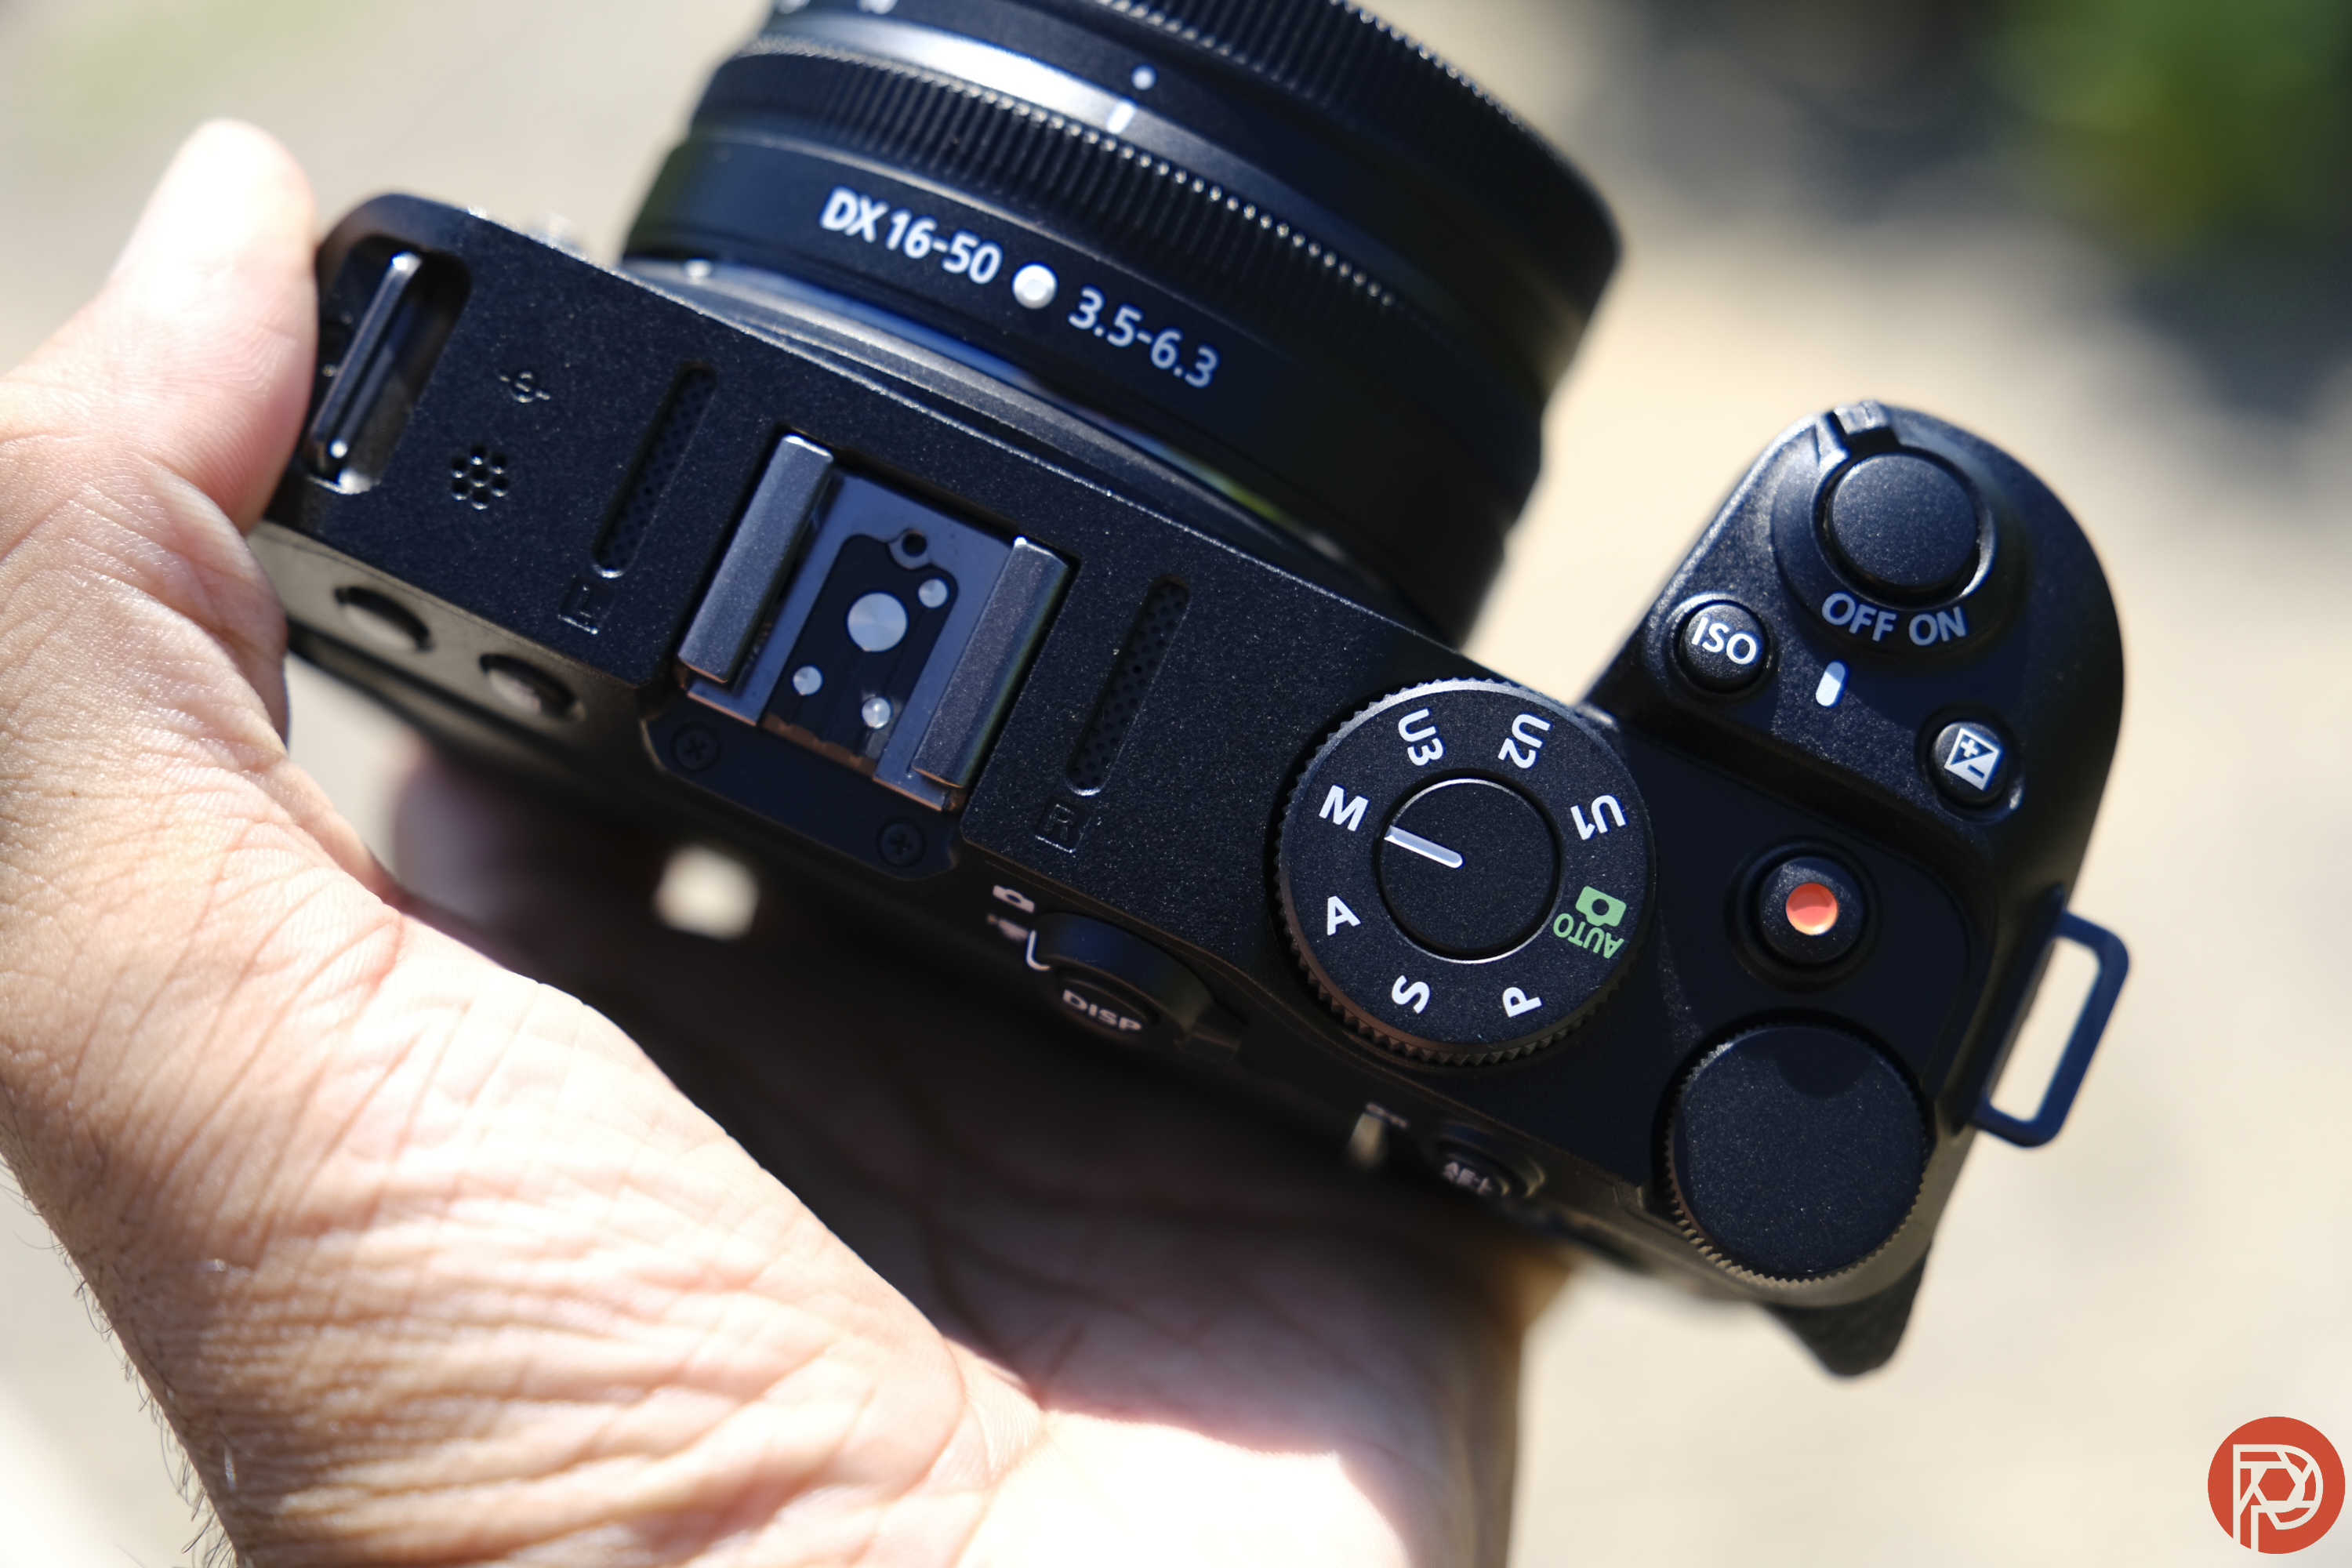 The Promising New Nikon Z30 Has an Instant Rebate!